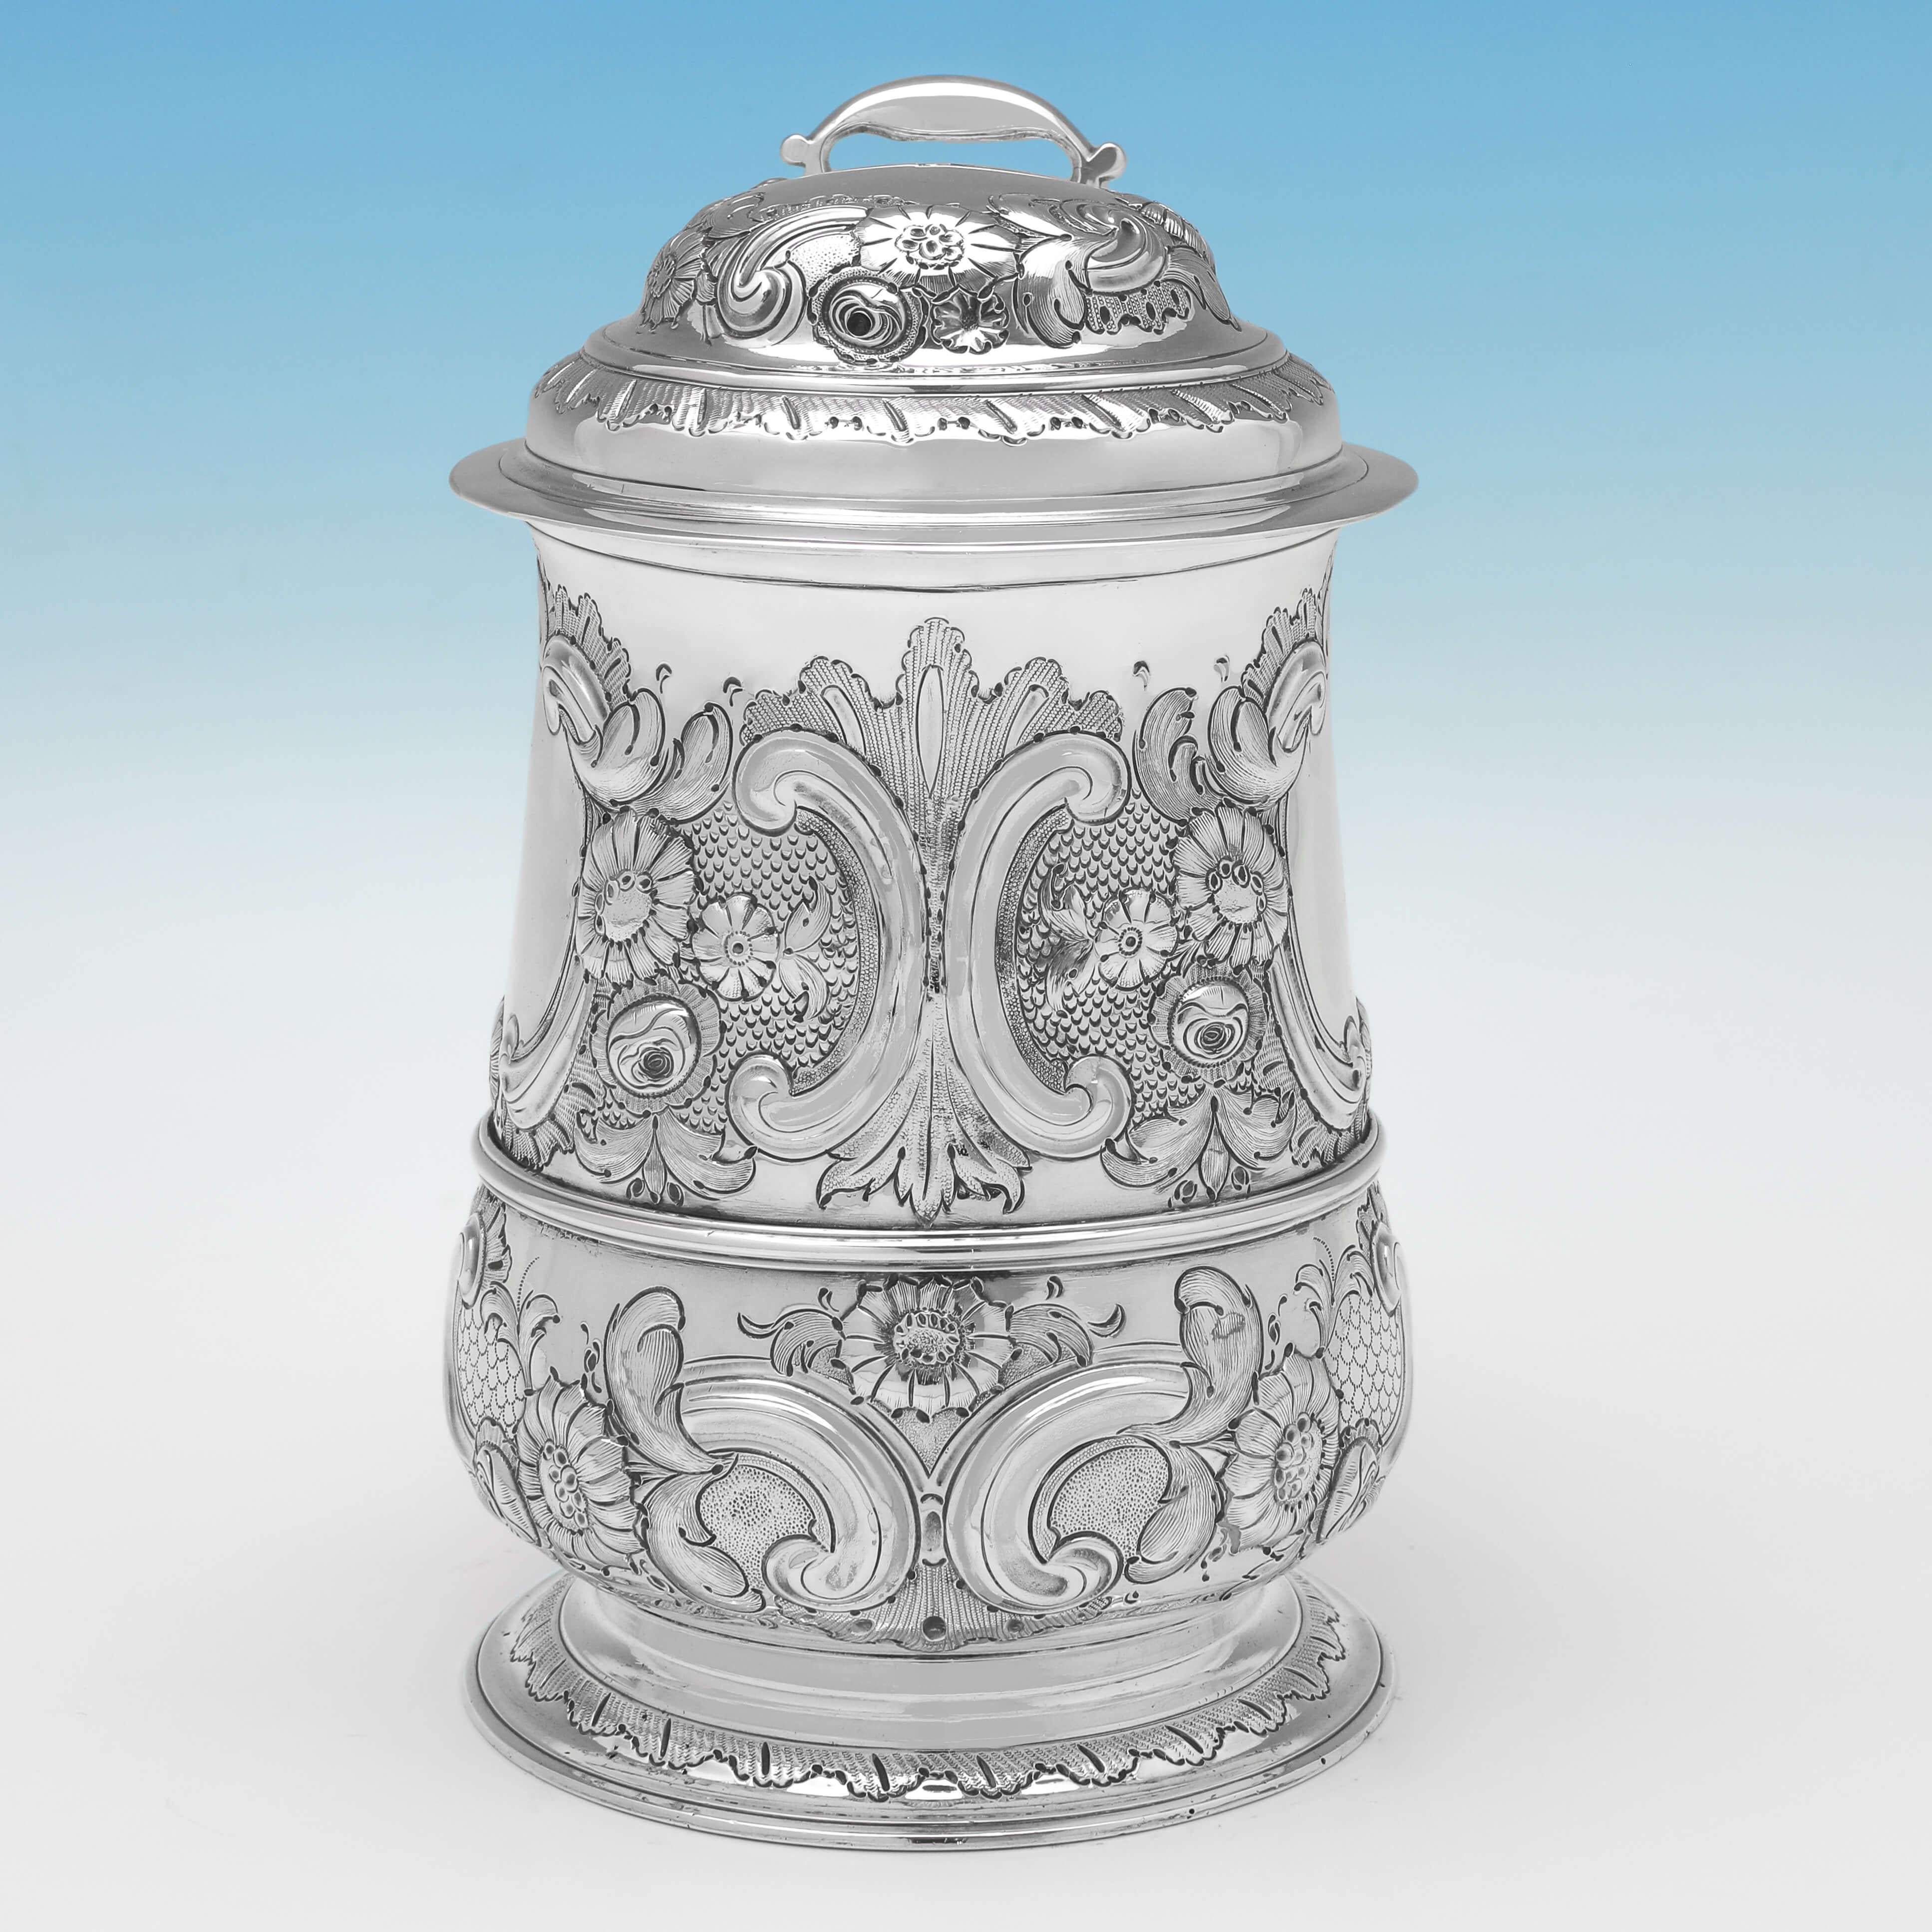 Hallmarked in Newcastle in 1756, this attractive, George II, Antique Sterling Silver Tankard, has been later chased during the victorian period to show the more ornate taste favoured at this time. 

The tankard measures 7